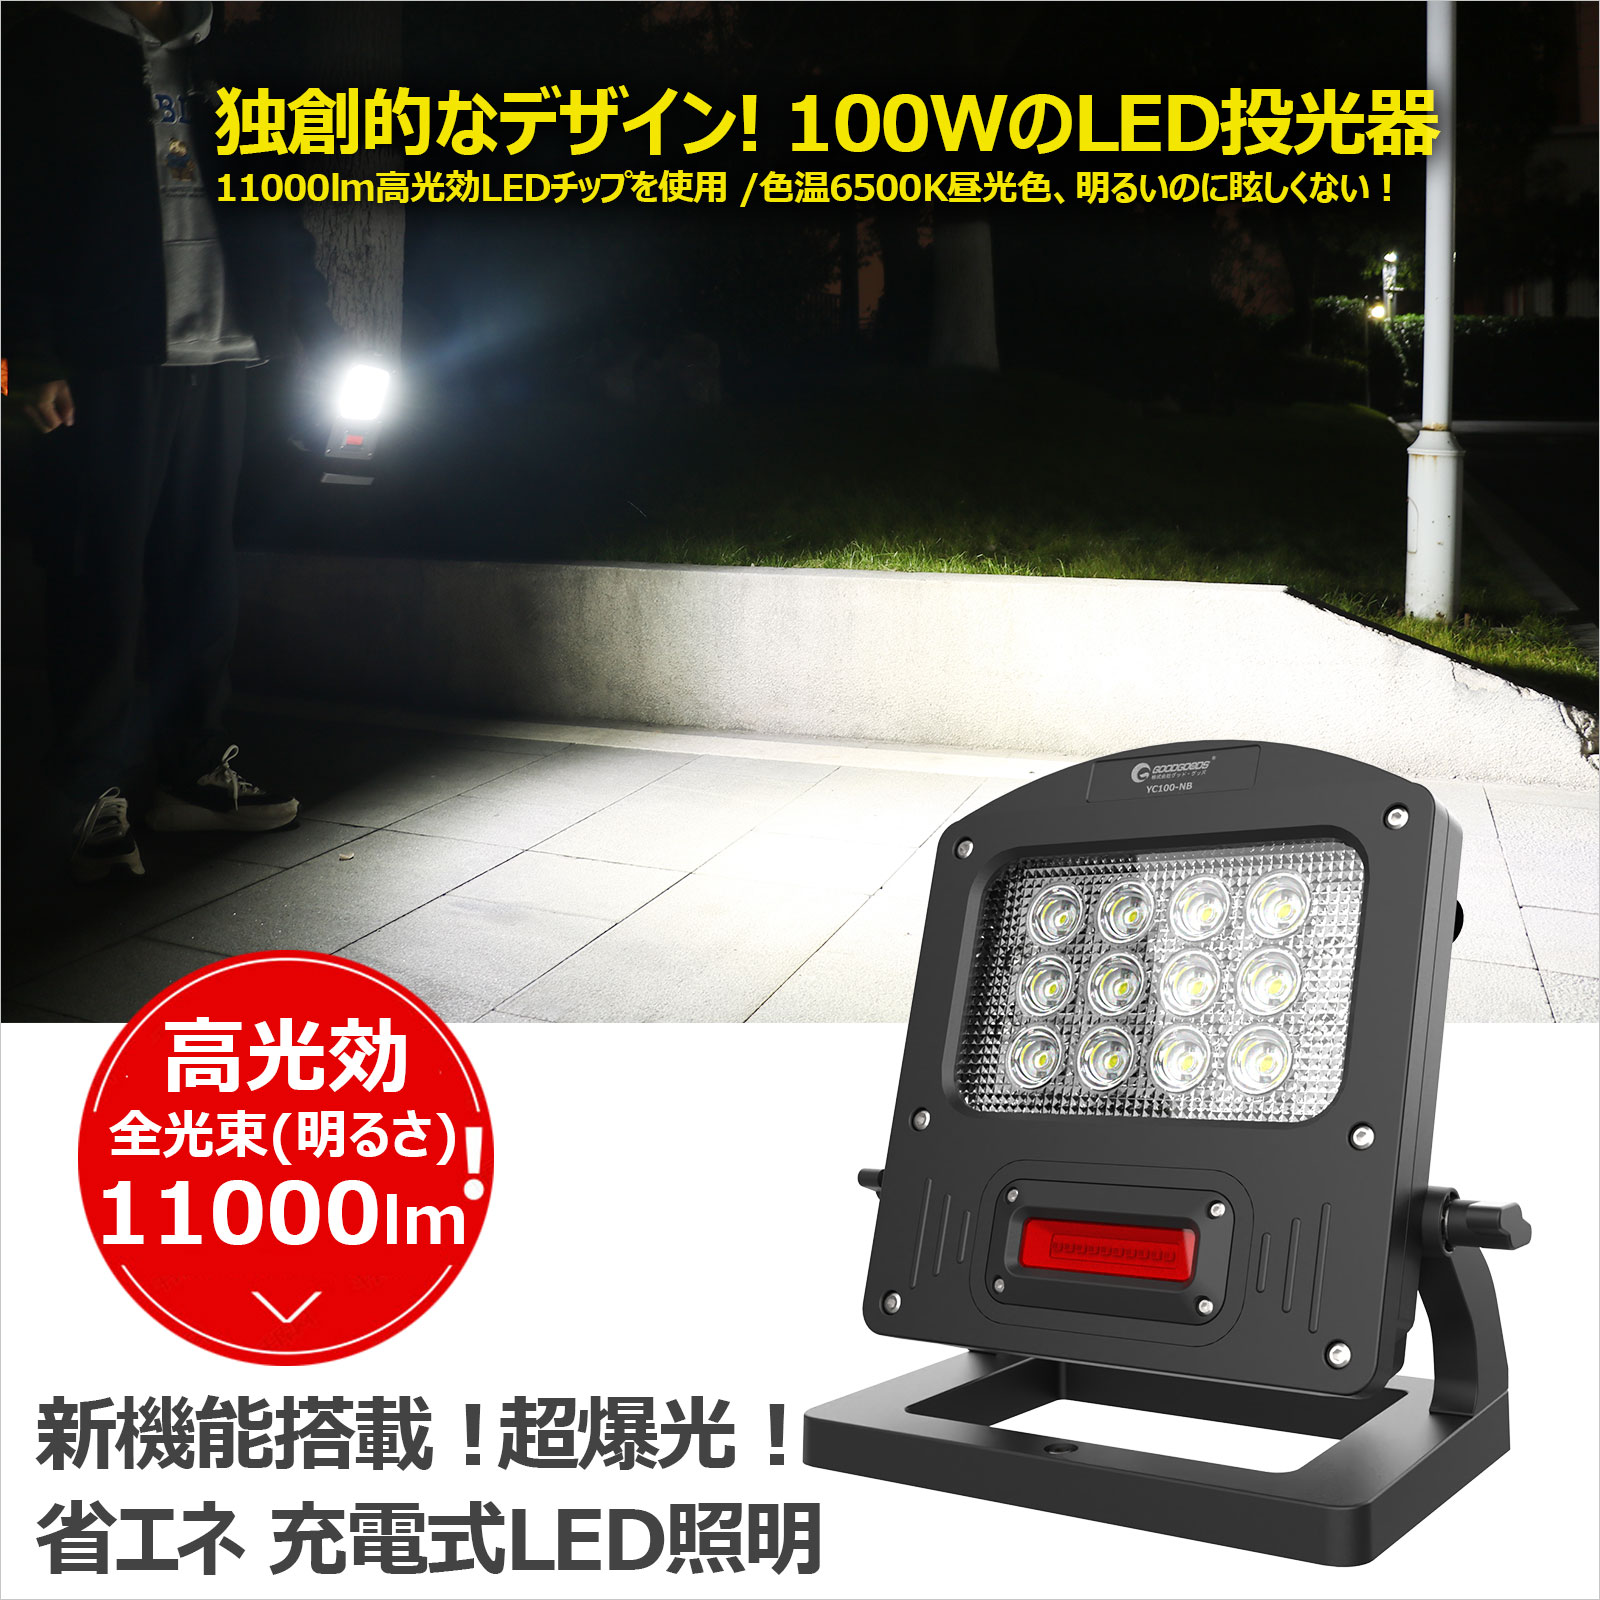 LED floodlight rechargeable portable floodlight small size led light bright signboard lighting 